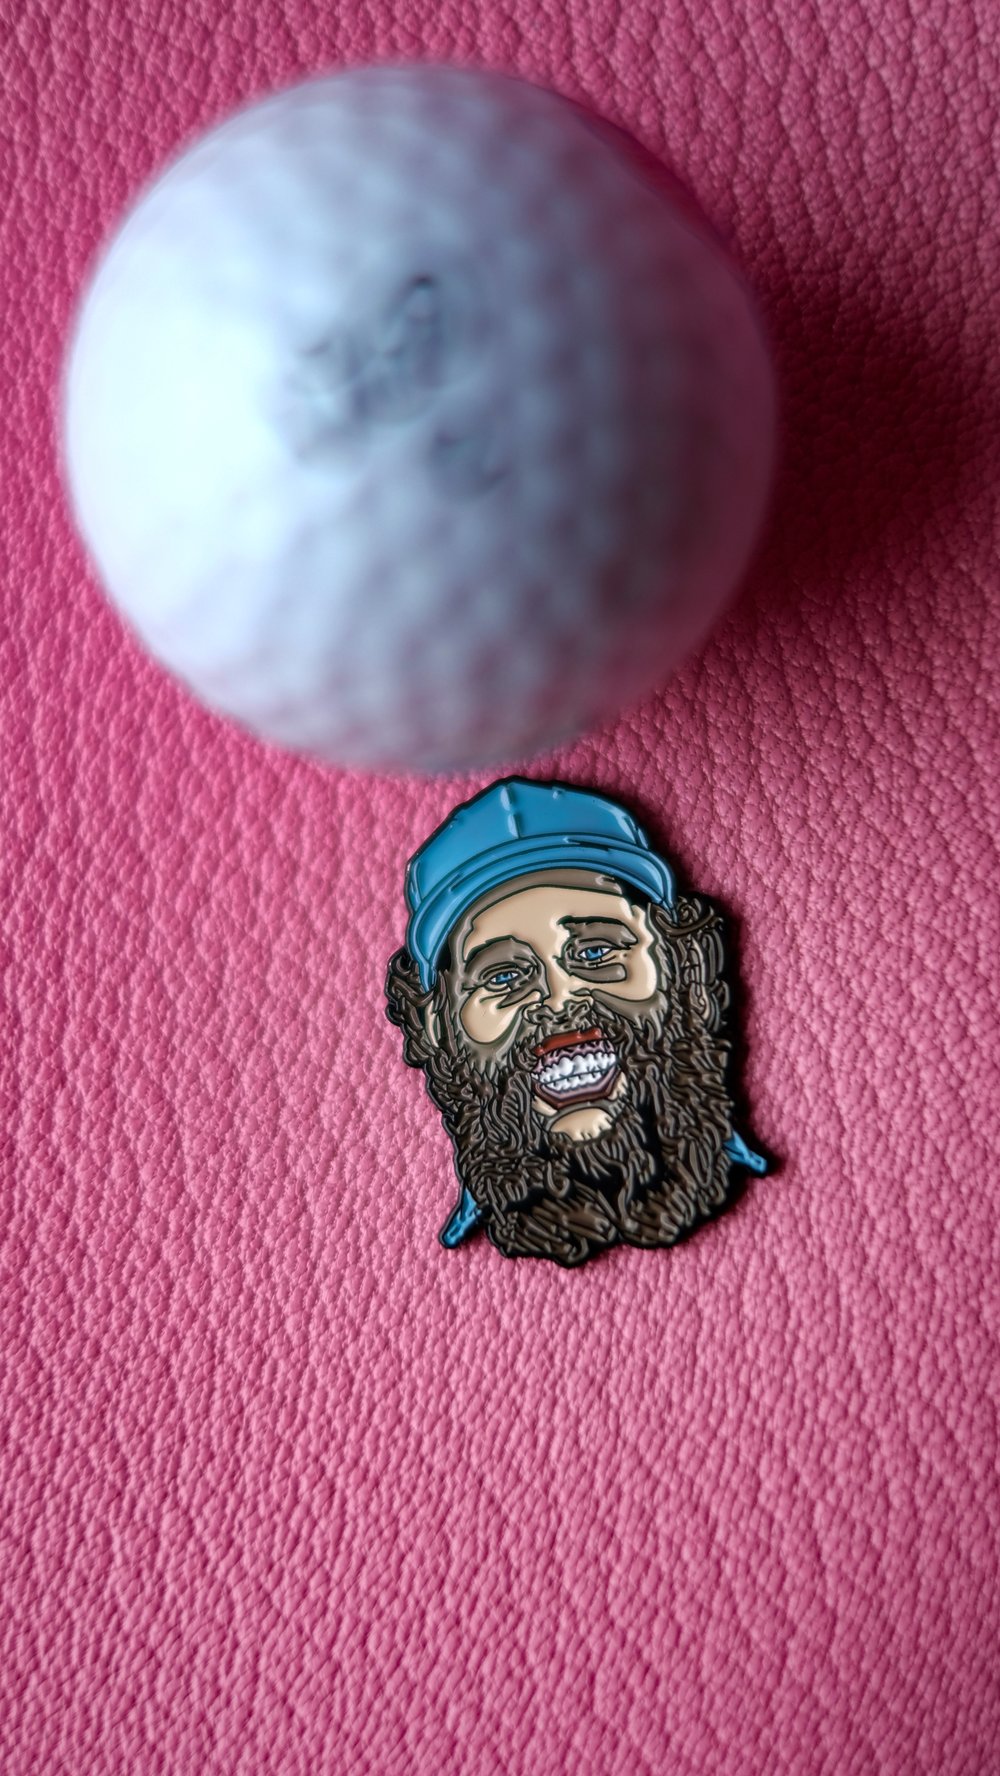 The Beef ball marker